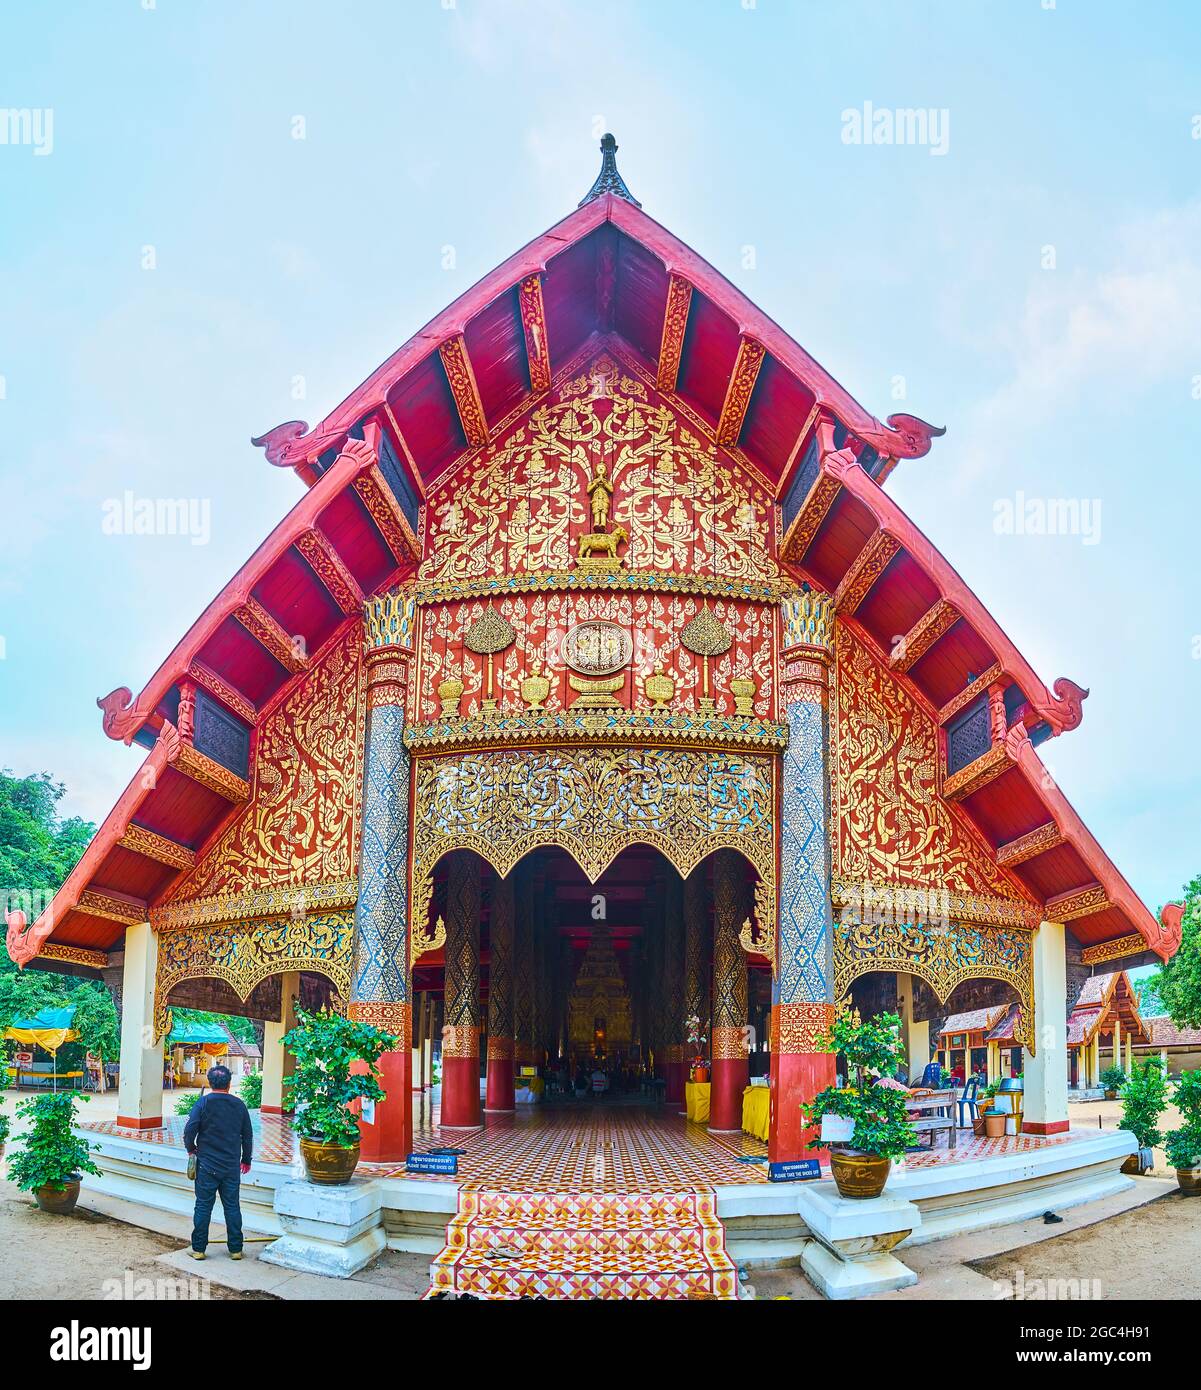 Spectacular facade of Viharn Luang of Wat Phra That Lampang Luang Temple with gilt patterns, three-tired pyathat roof, carvings and teak pillars, Lamp Stock Photo